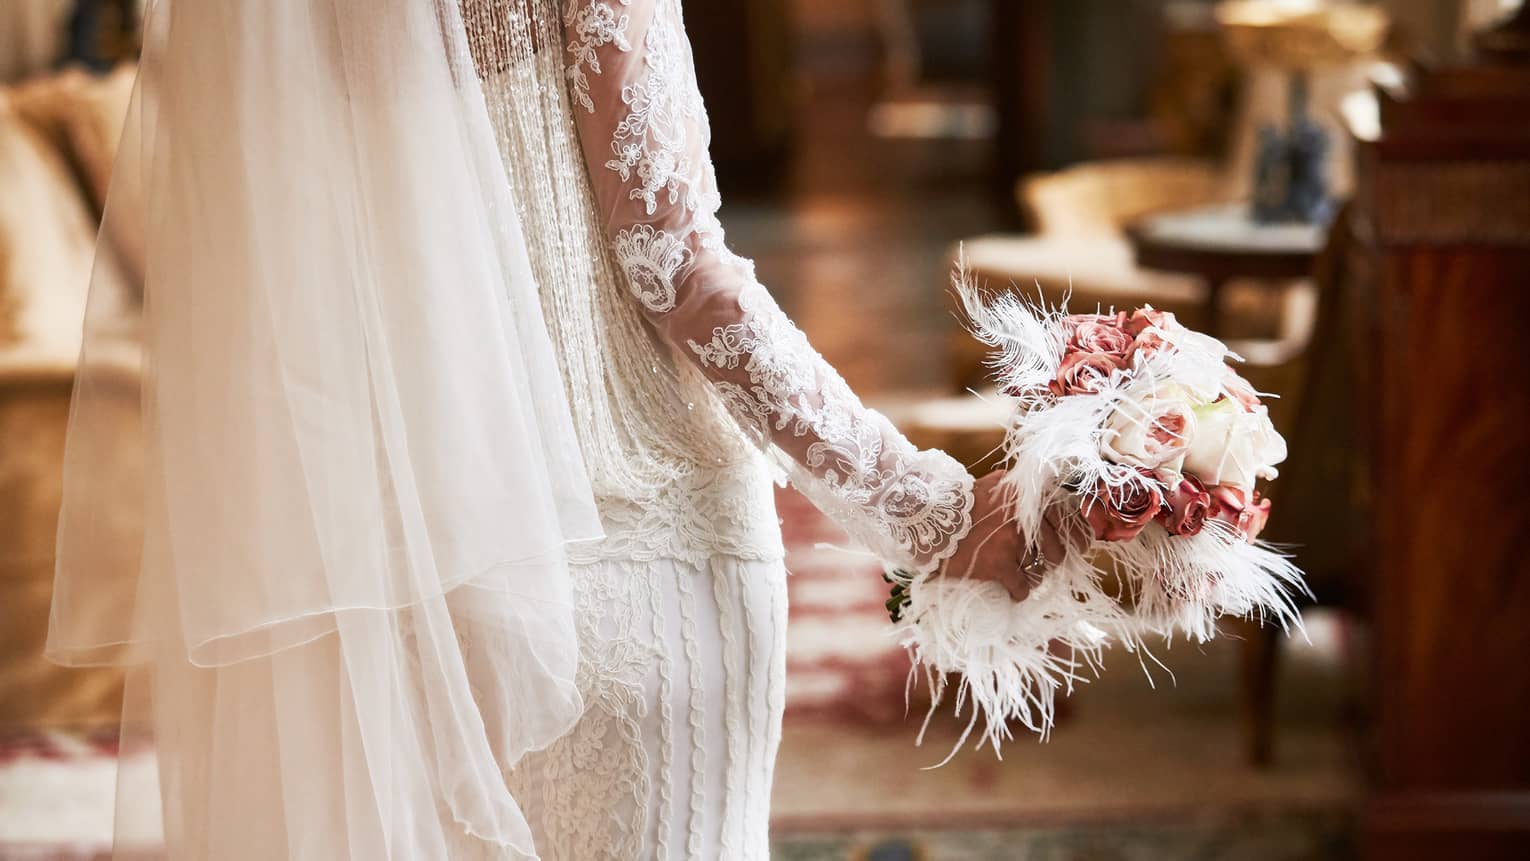 A close up of a bride's bouquet made up of white roses, pink flowers and white feathers